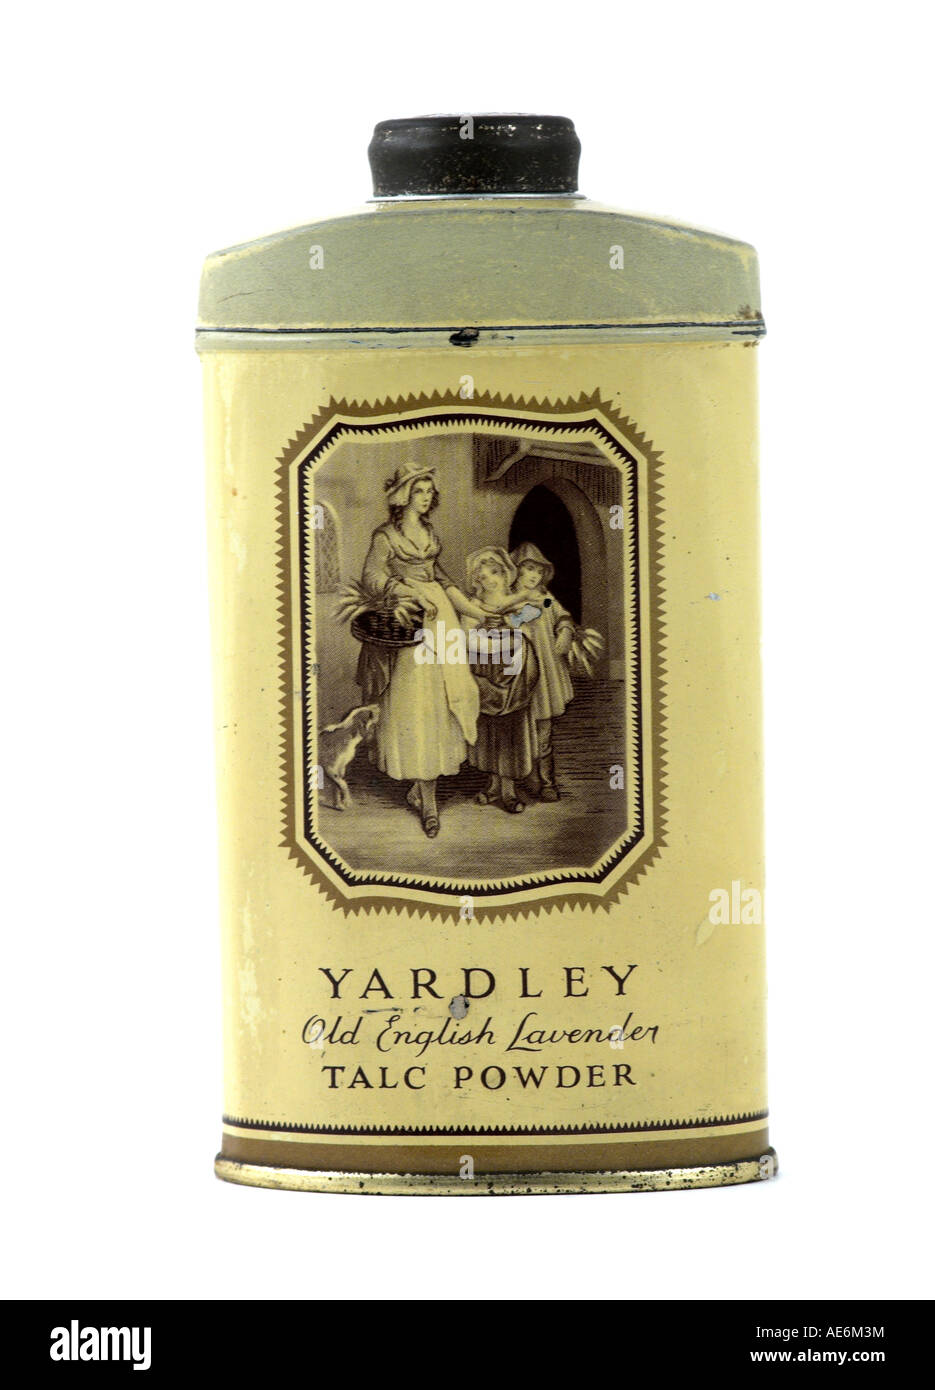 A Yardley old talc powder tin 1930s Editorial Use Only Stock Photo